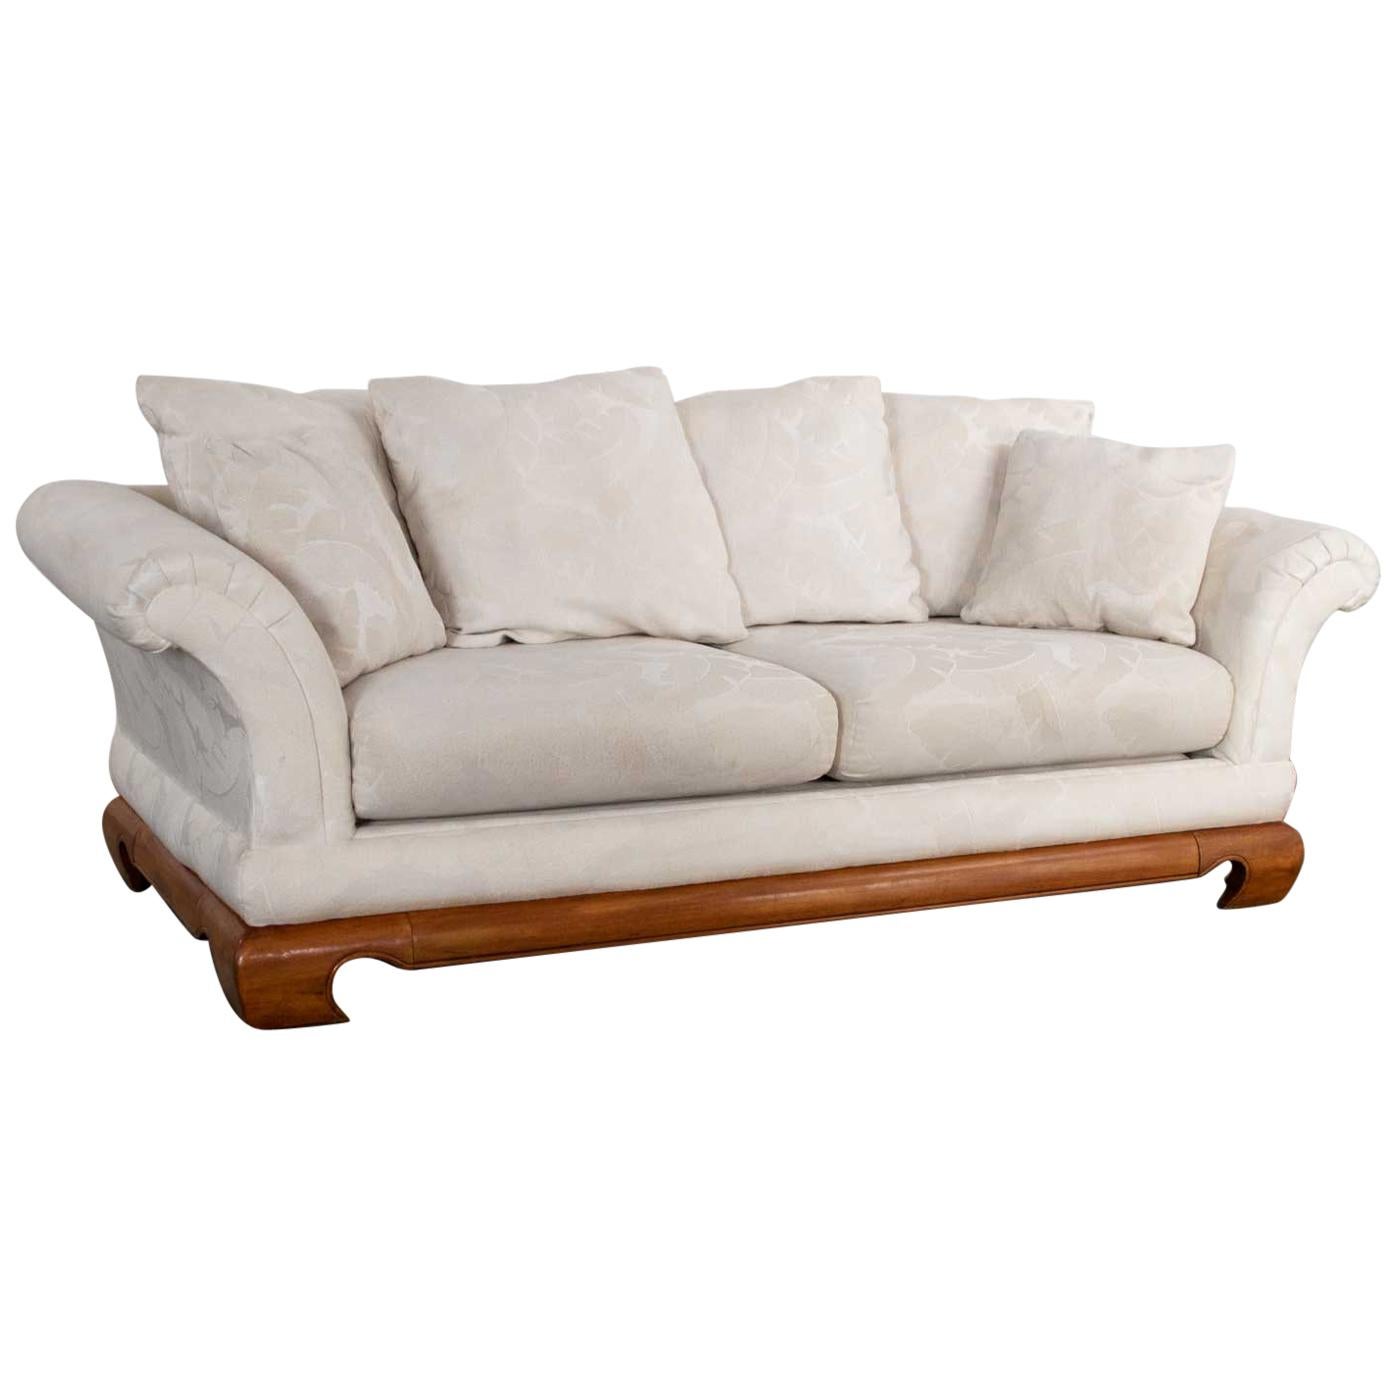 Chinoiserie Chow Leg Ming Style Sofa by Schnadig International Furniture